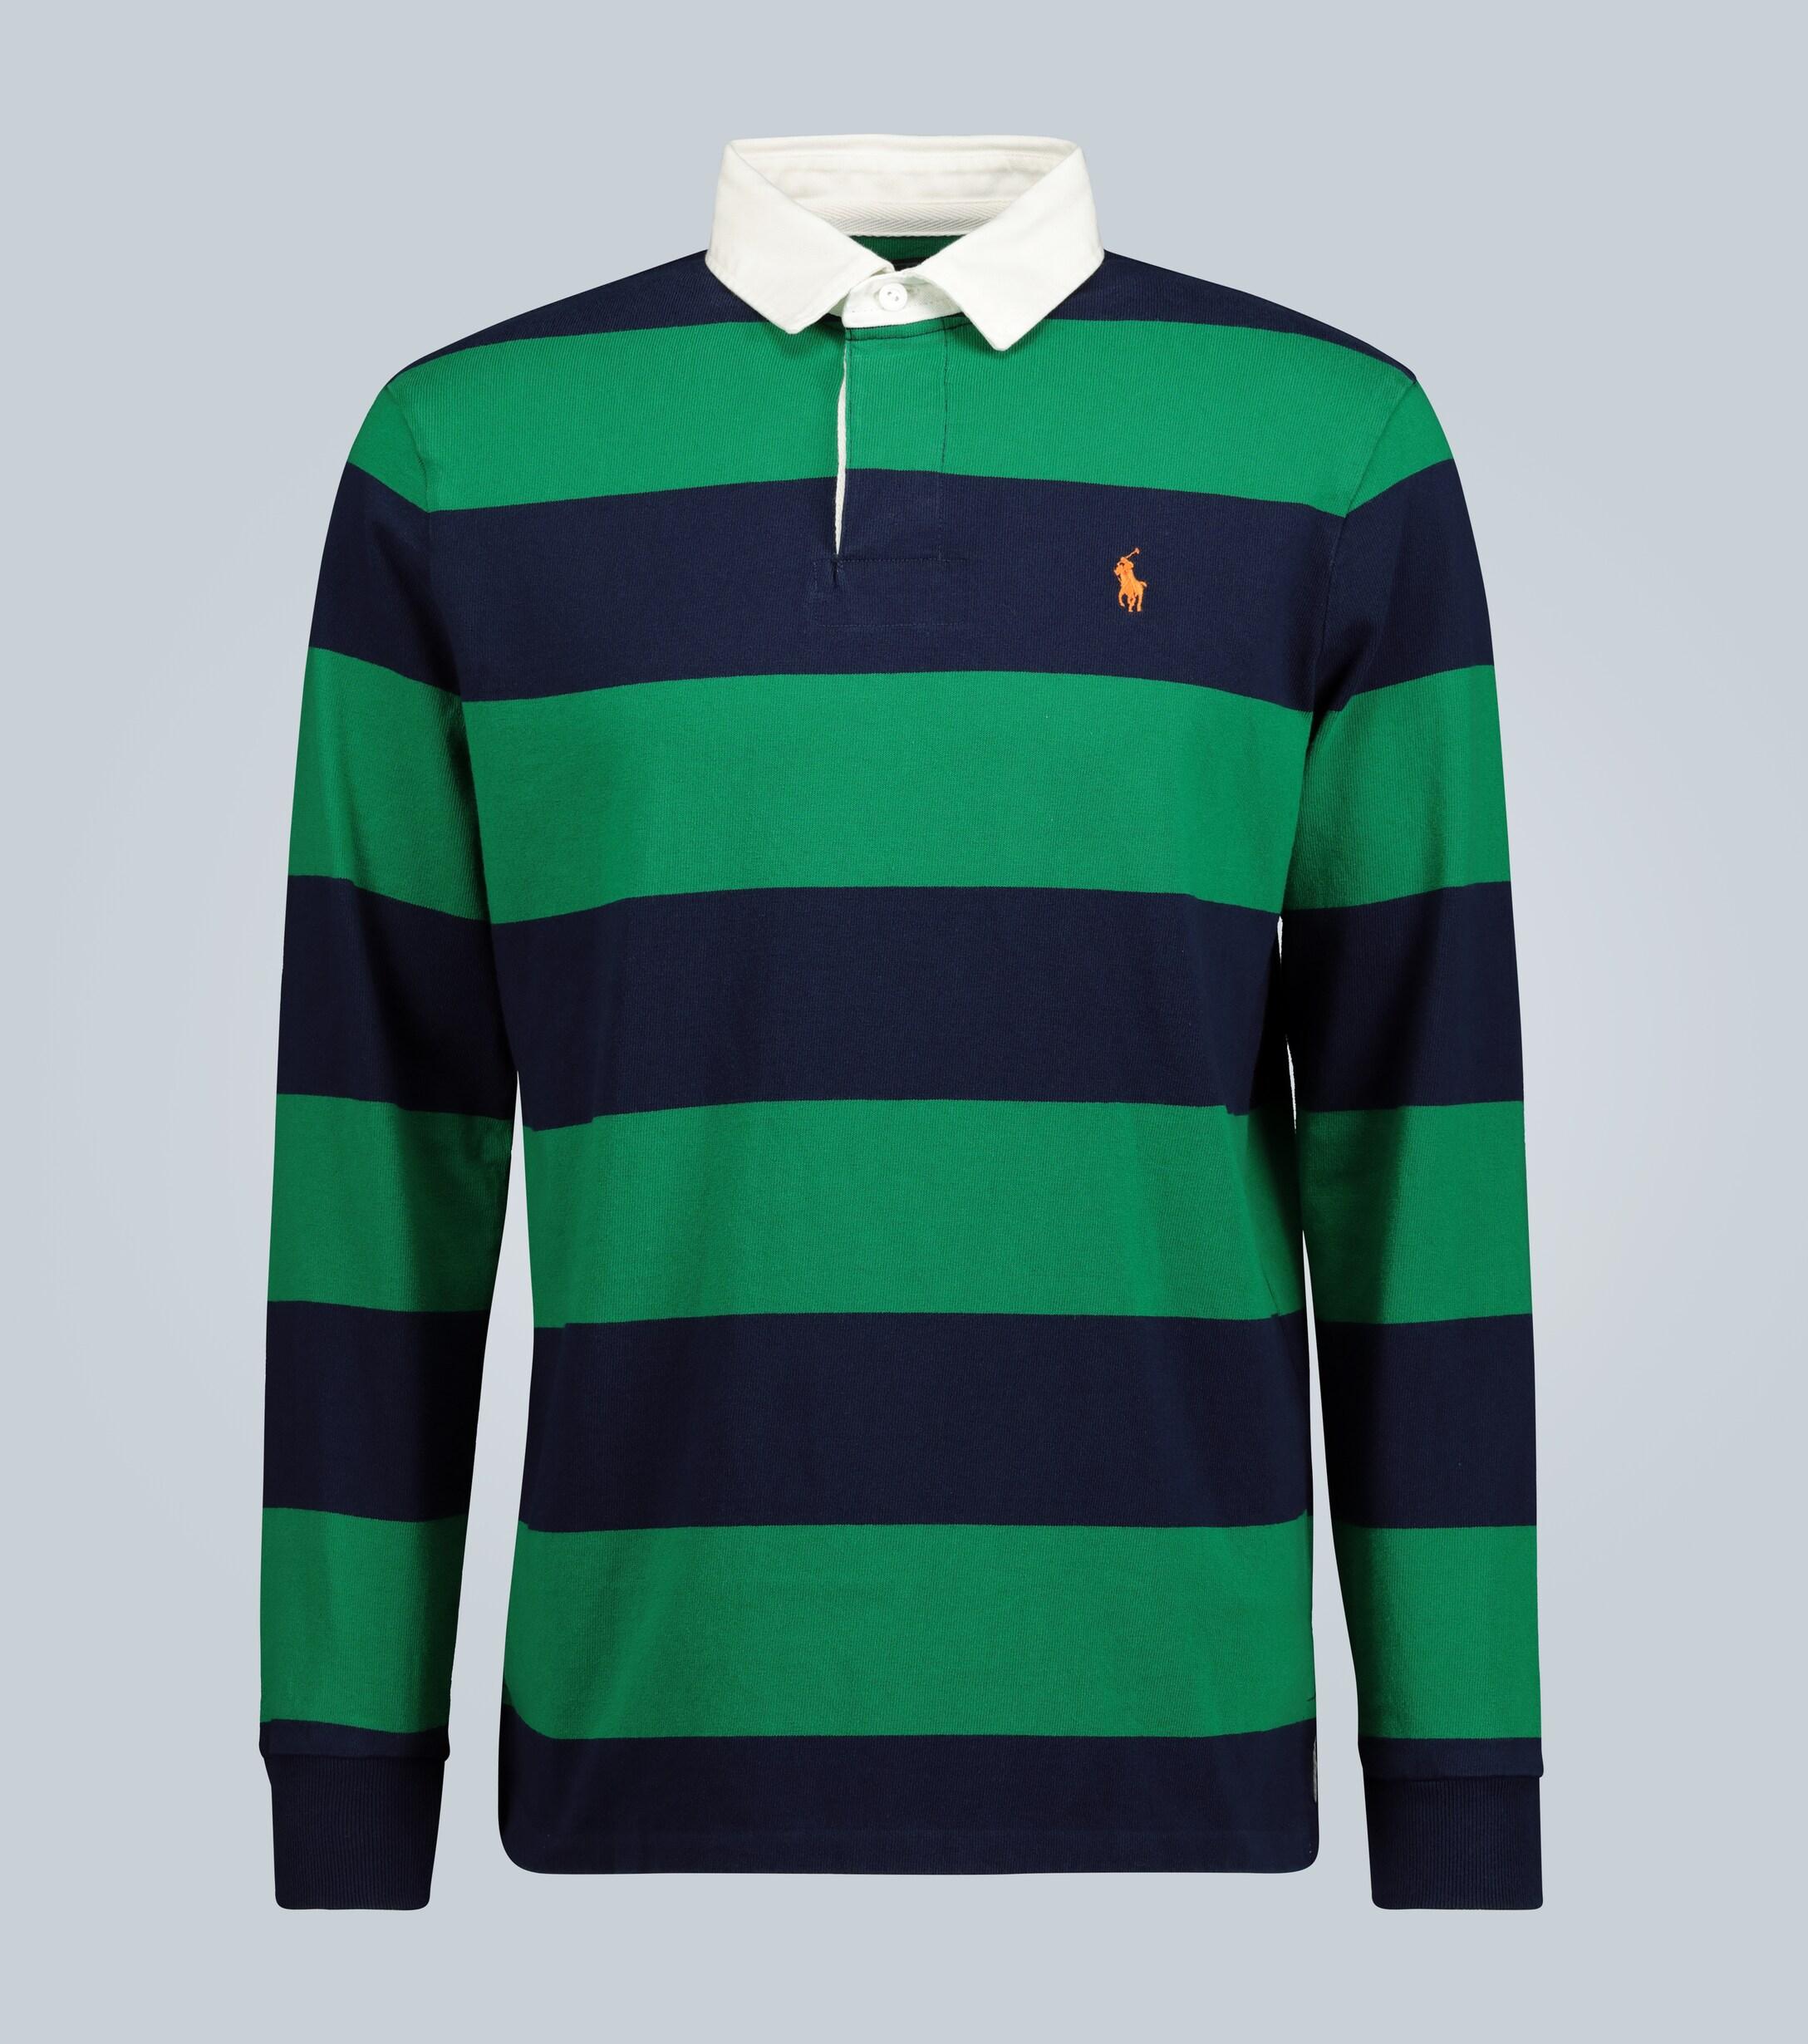 polo ralph lauren striped rugby shirt,Save up to 15%,www.ilcascinone.com